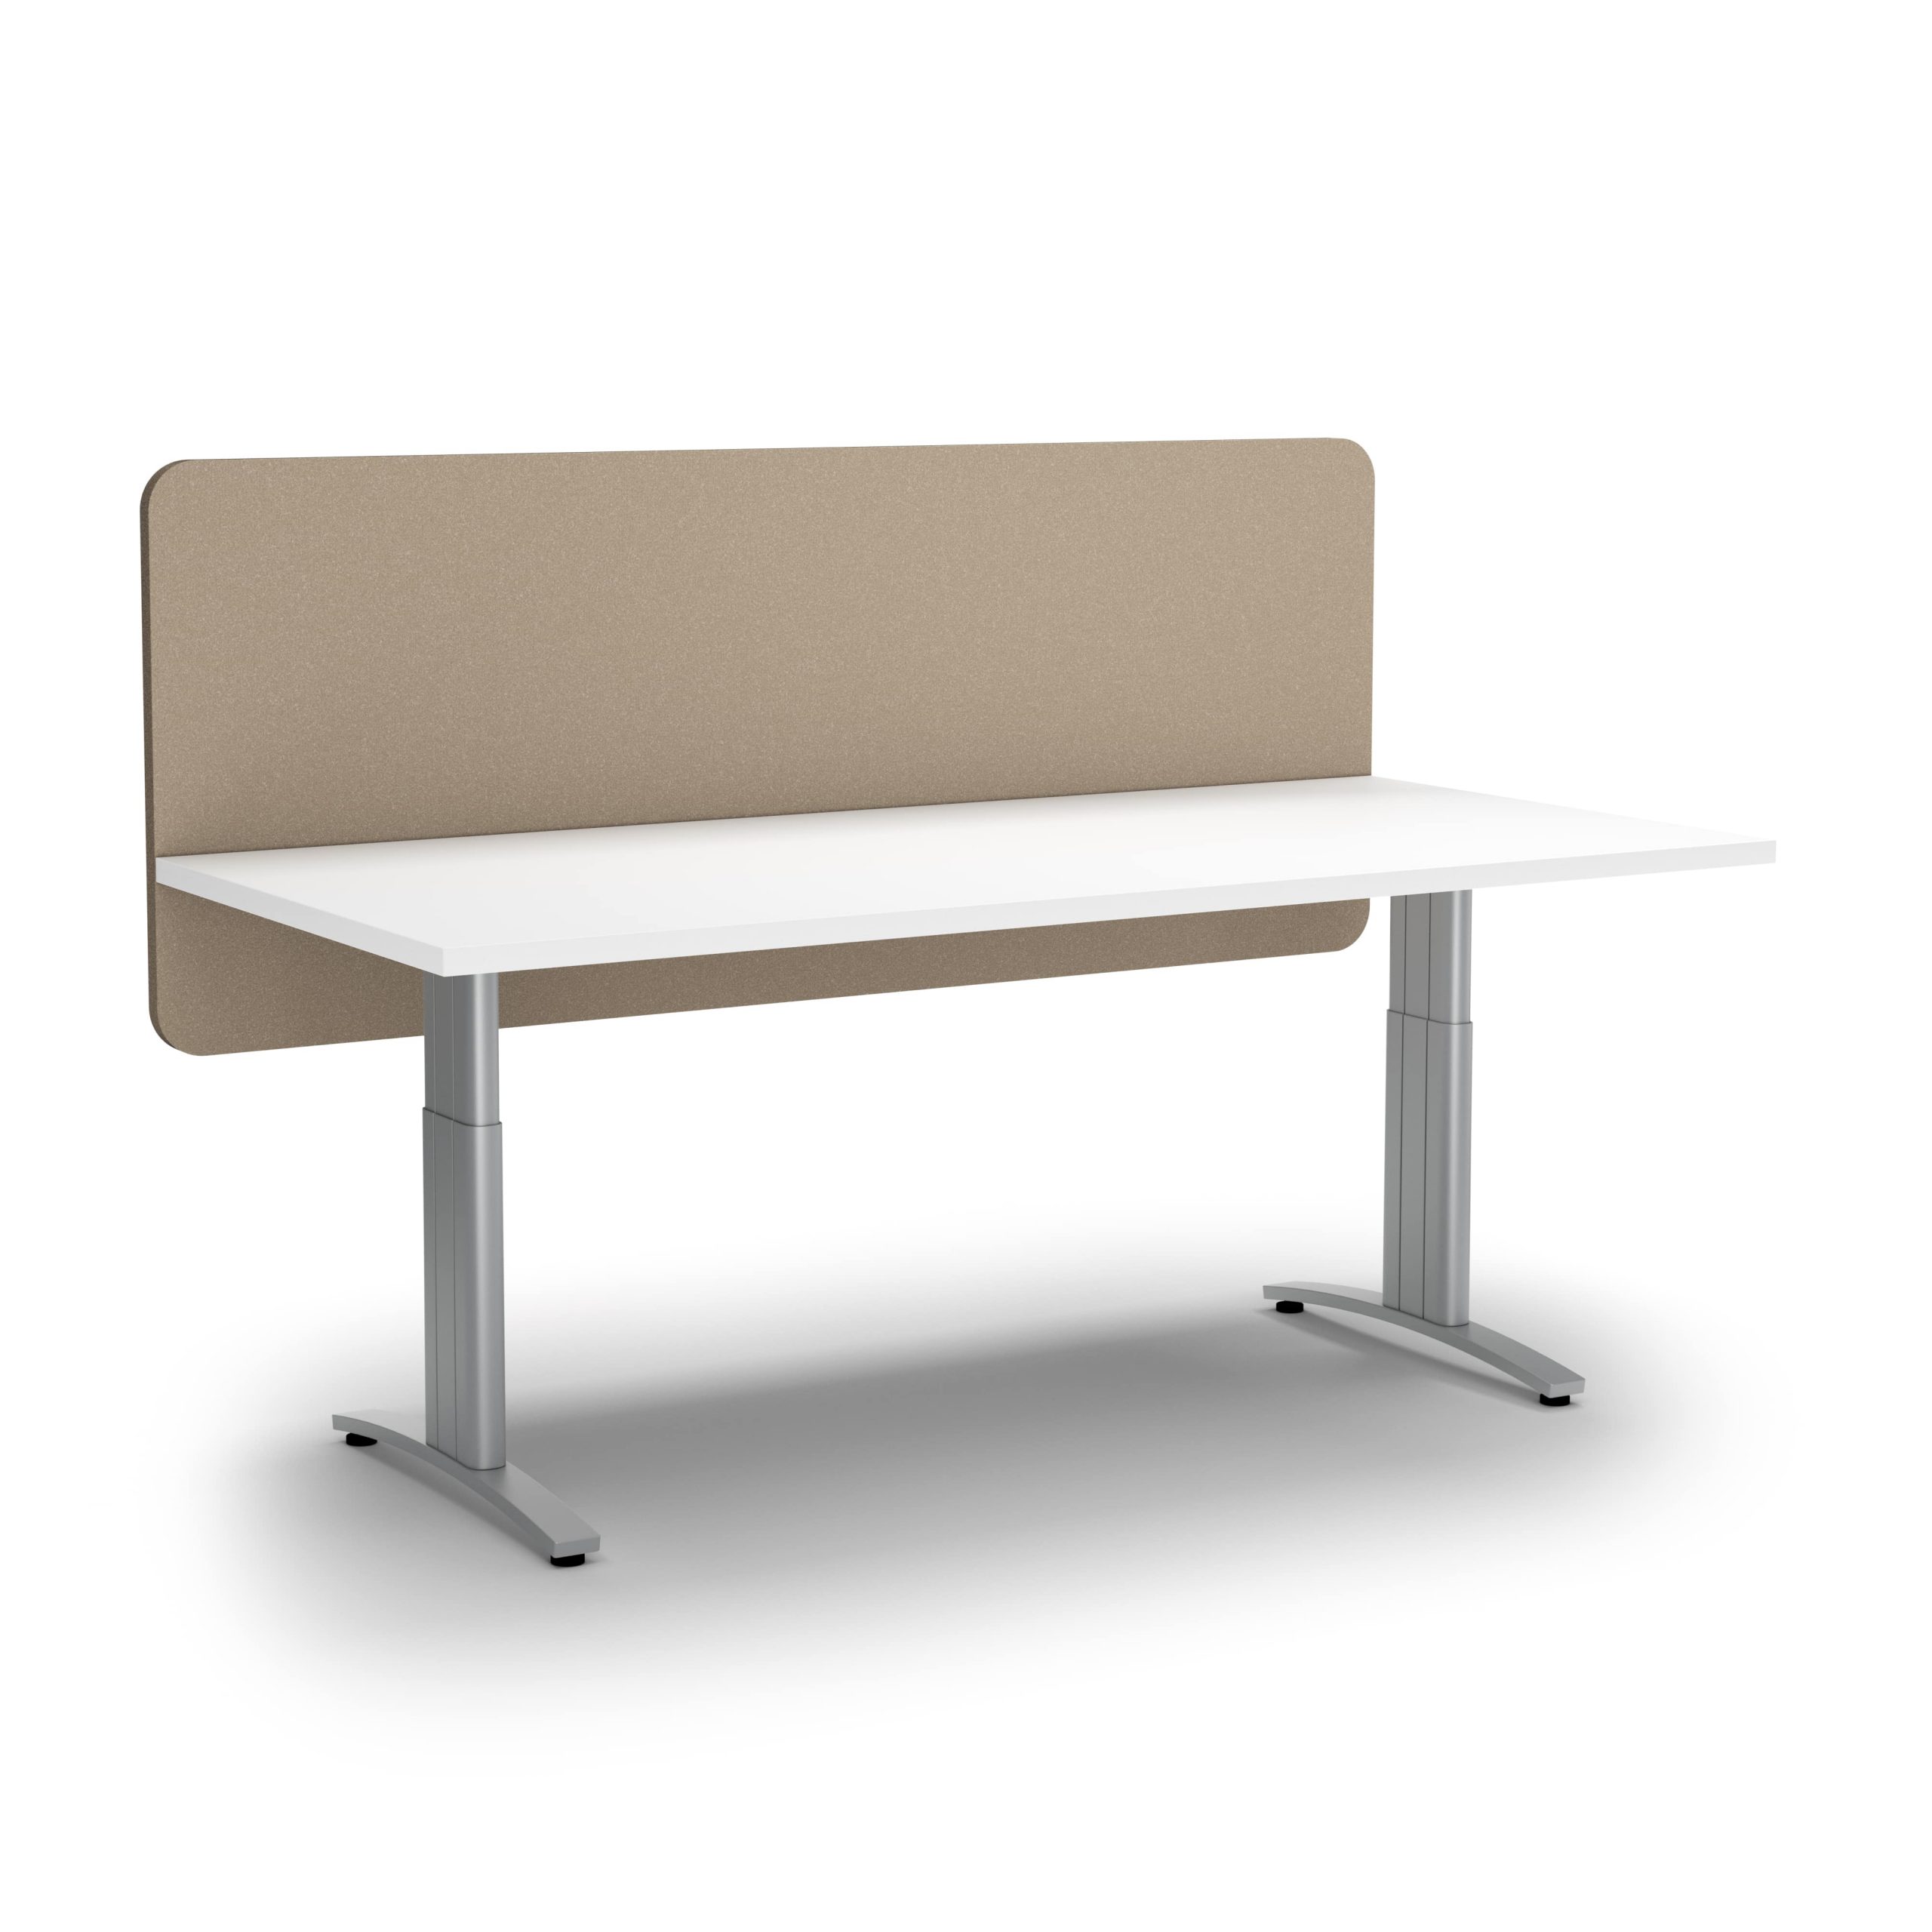 Acoustic Desk Screen Modesty Panel - Boyd Workspaces